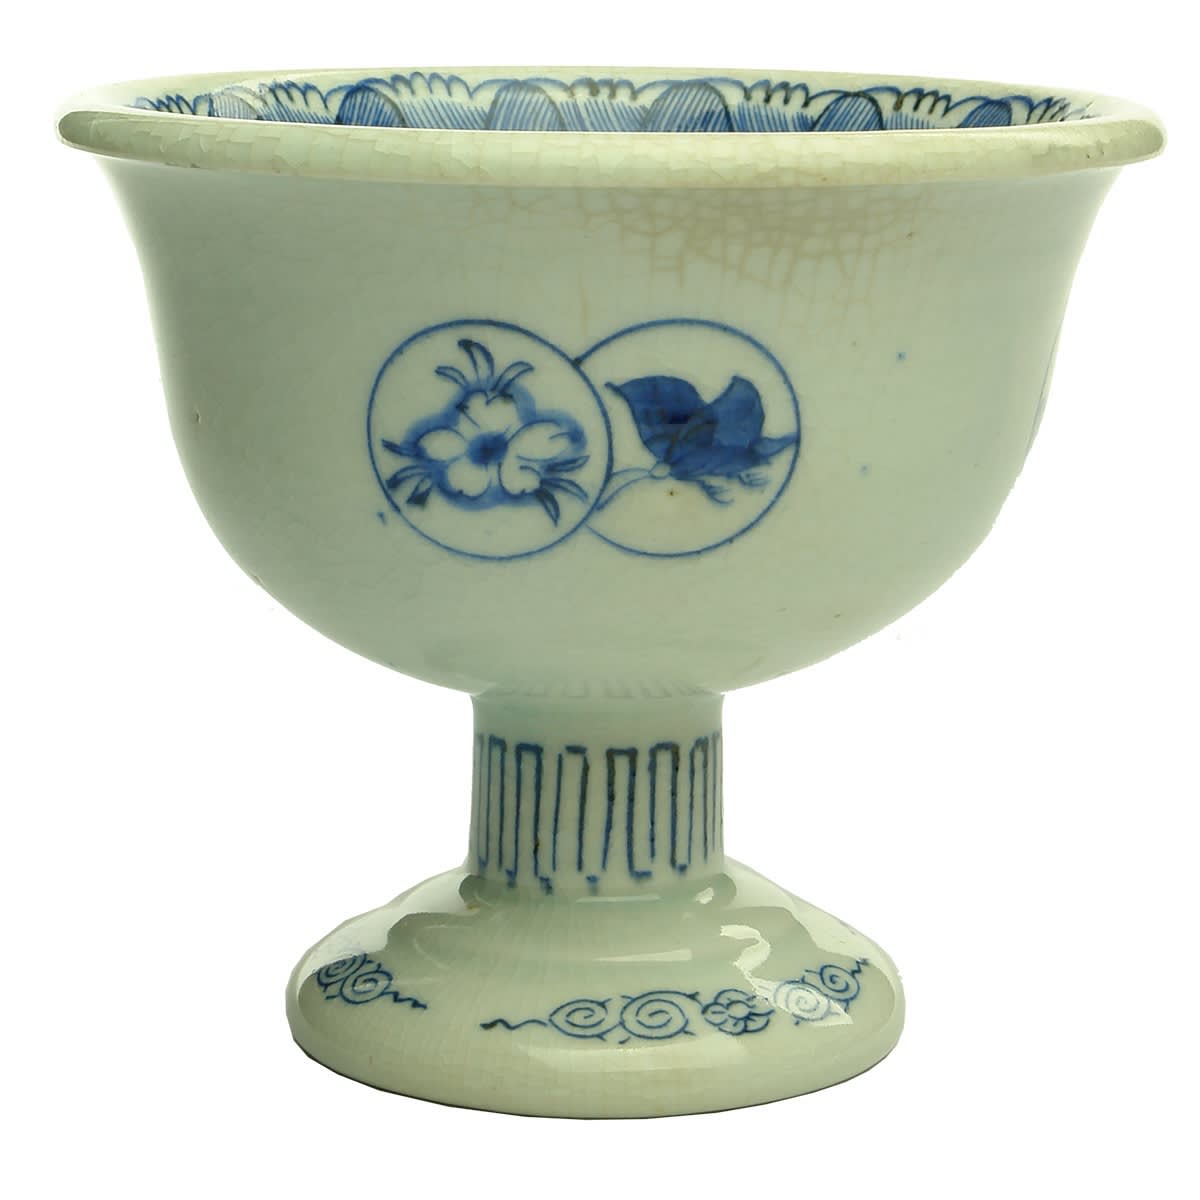 Blue & White Porcelain bowl with pedestal stand. Hole to centre of stand underneath and unglazed base, looks like it slotted onto something.